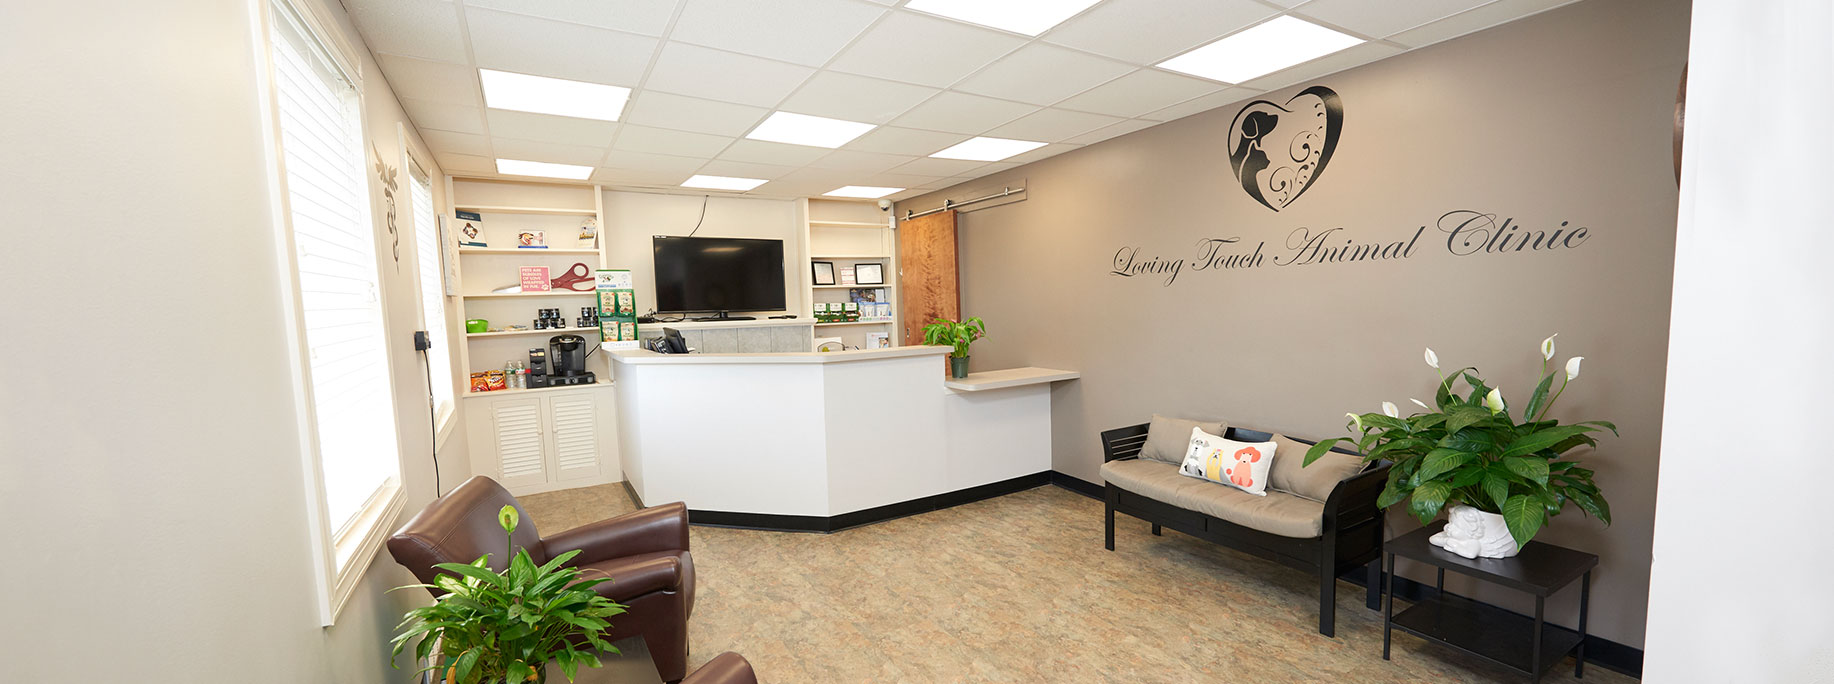 About us | Veterinarian in Newark, DE | Loving Touch Animal Clinic